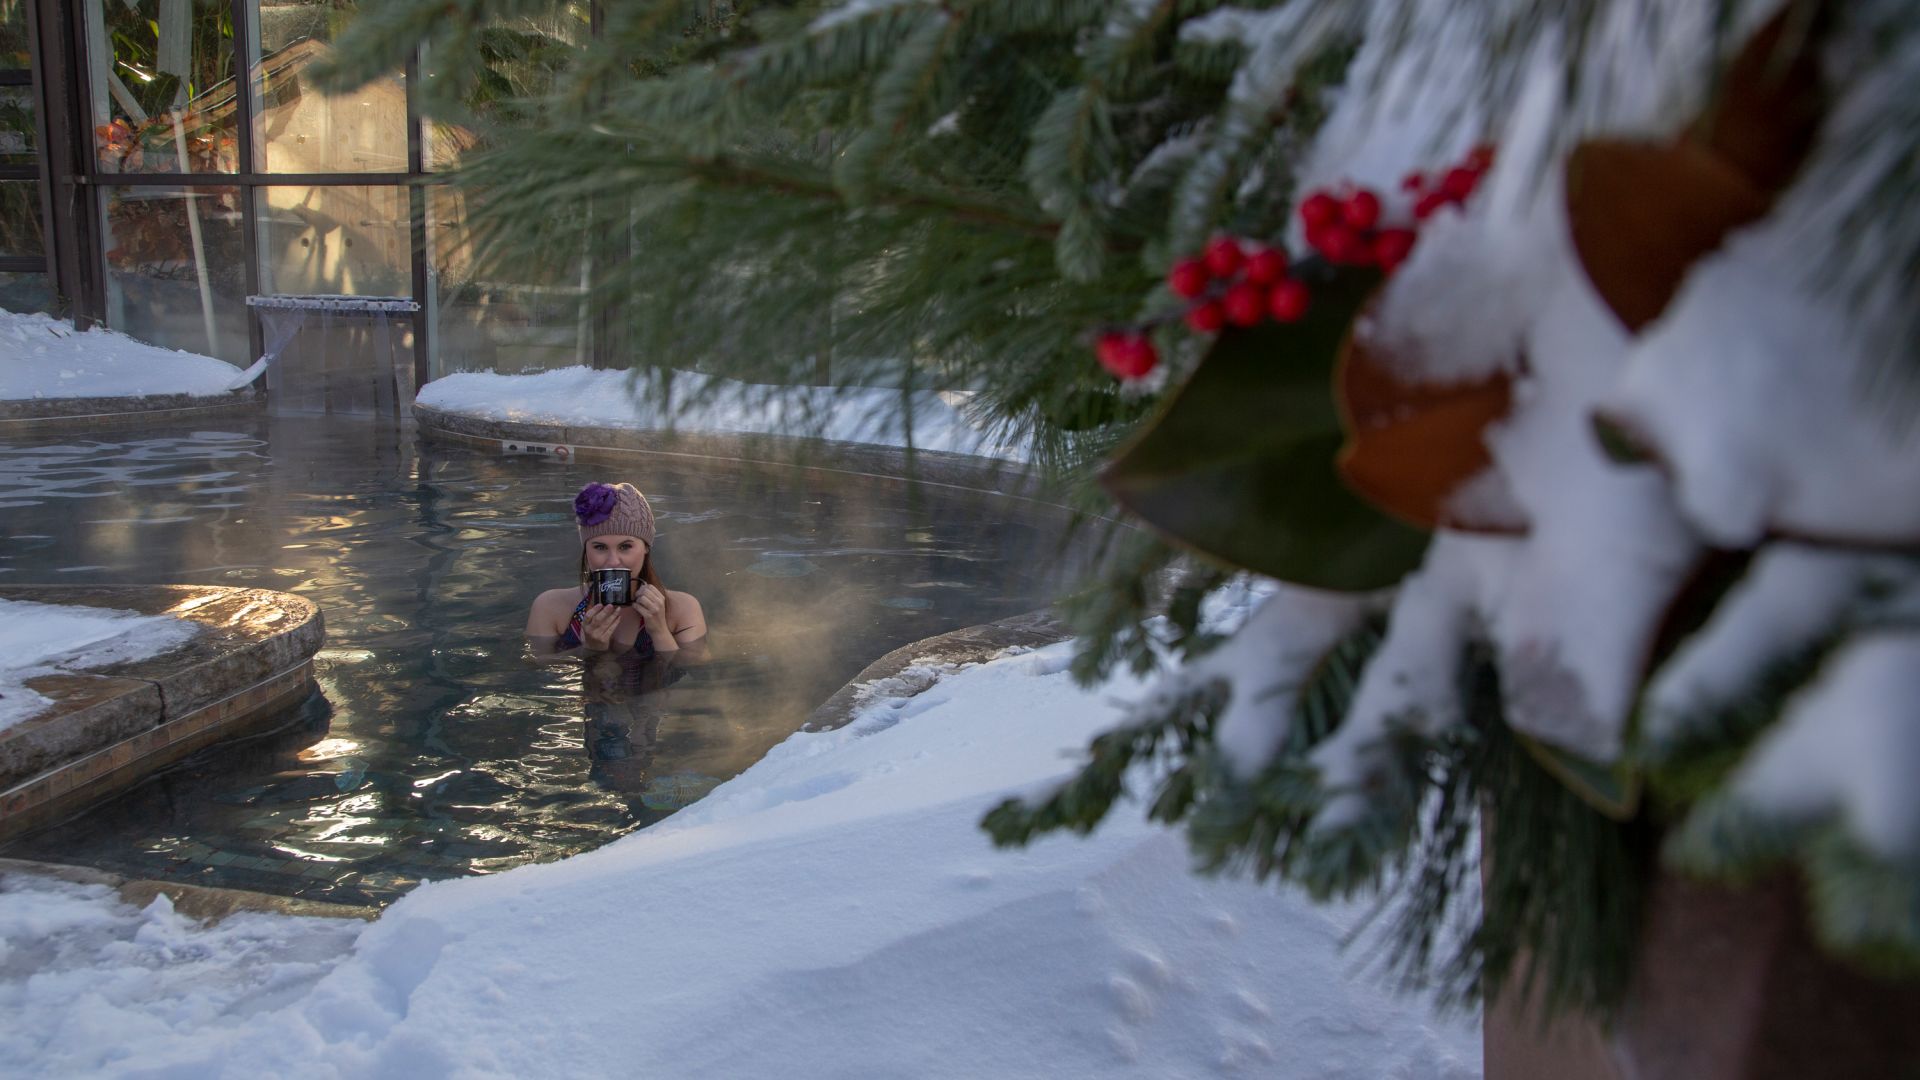 Woman drinking out of a mug in a snow pool.